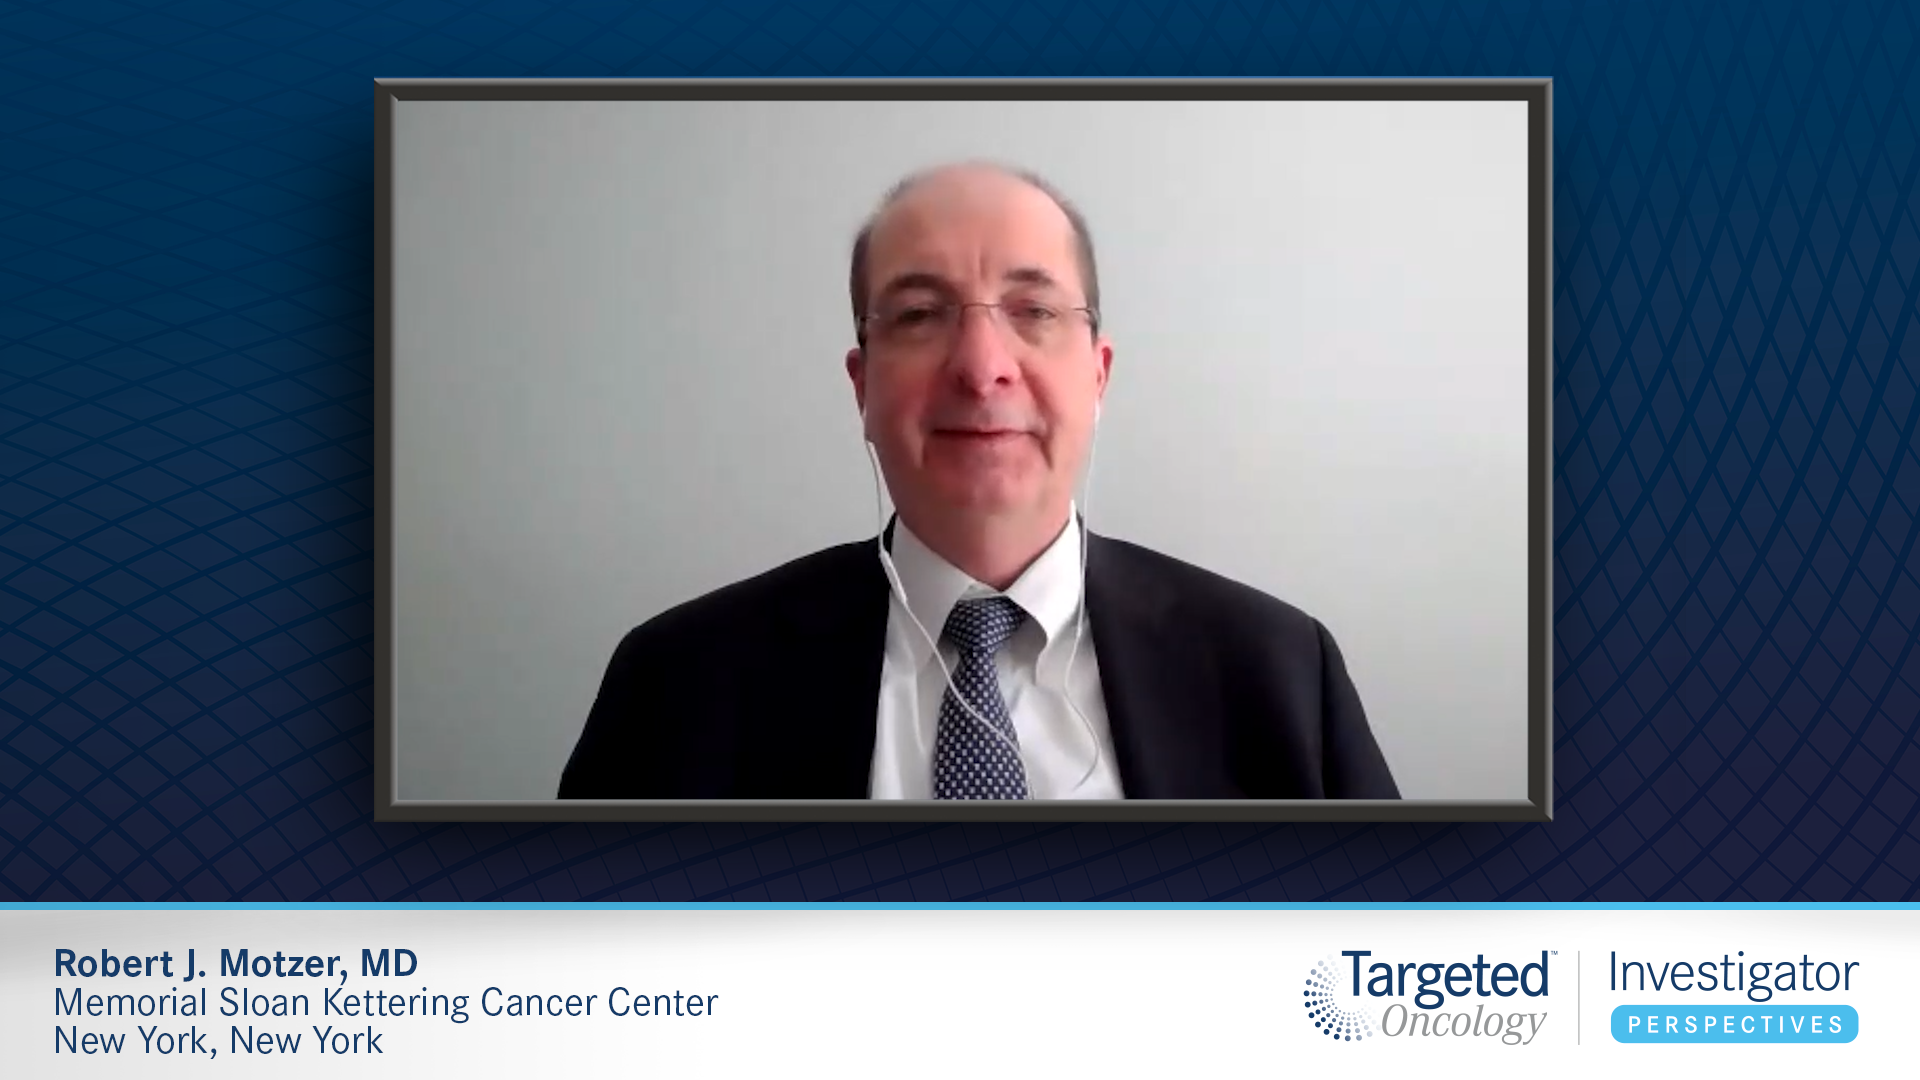 Dosing Strategies to Maximize Efficacy in RCC